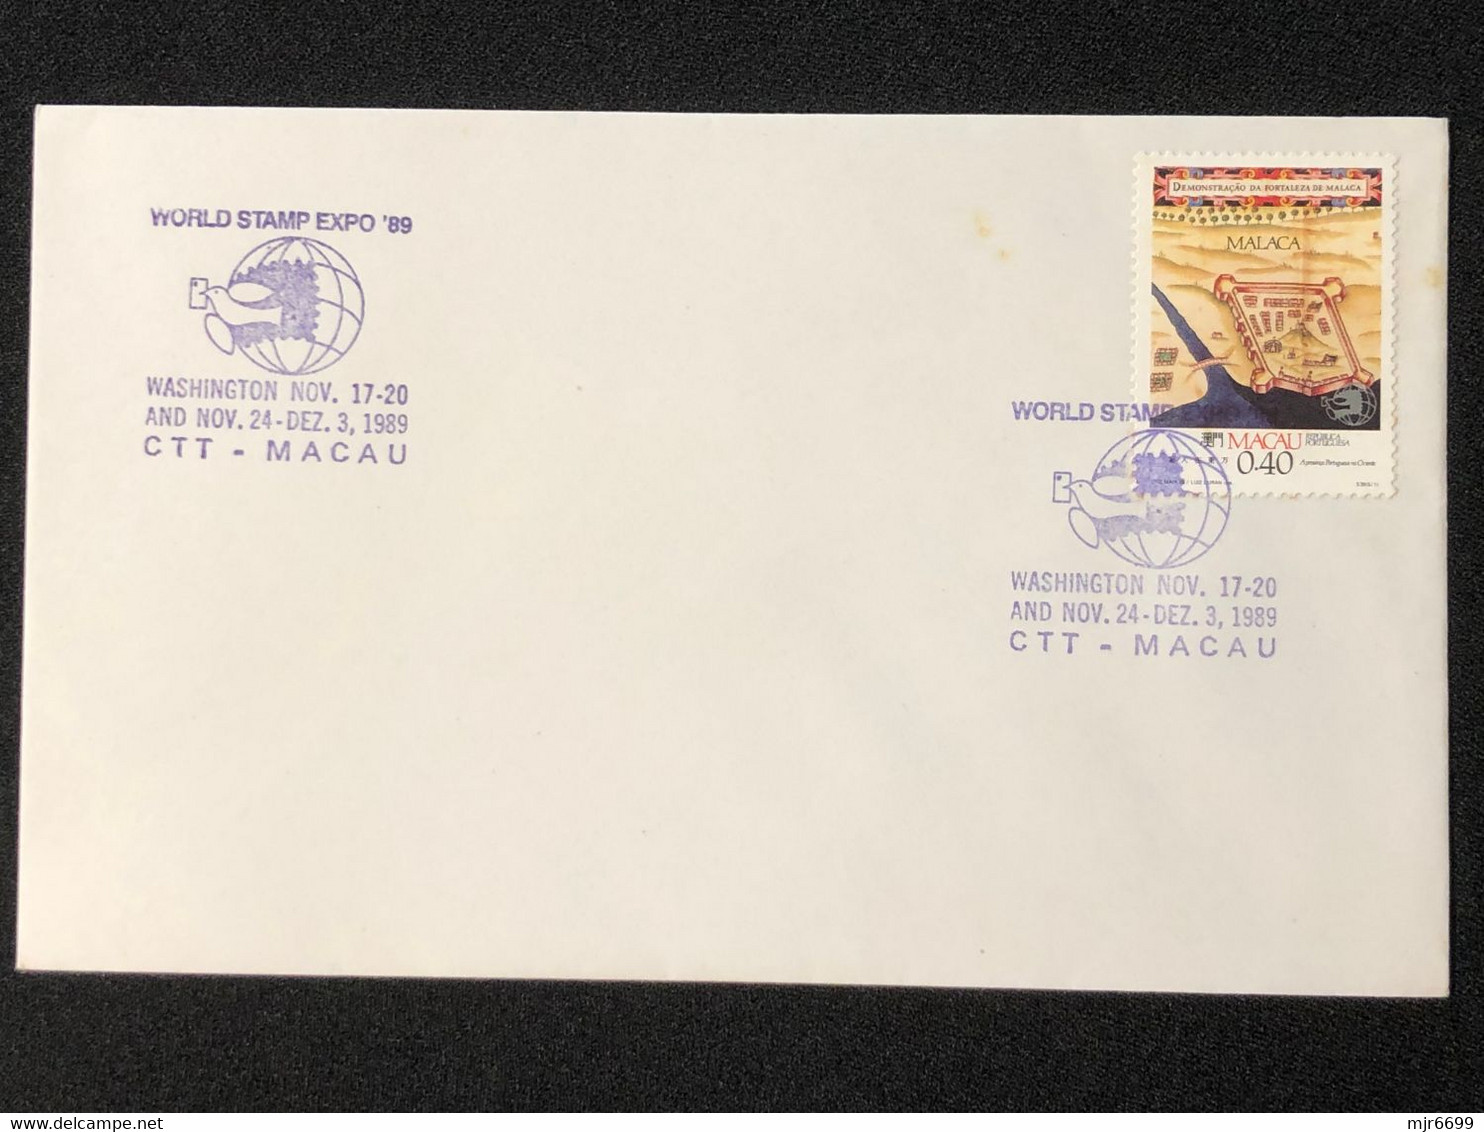 MACAU WORLD STAMP EXPO"90 (WASHINGTHON) COMMEMORATIVE CANCELLATION ON PLAIN COVER - Lettres & Documents